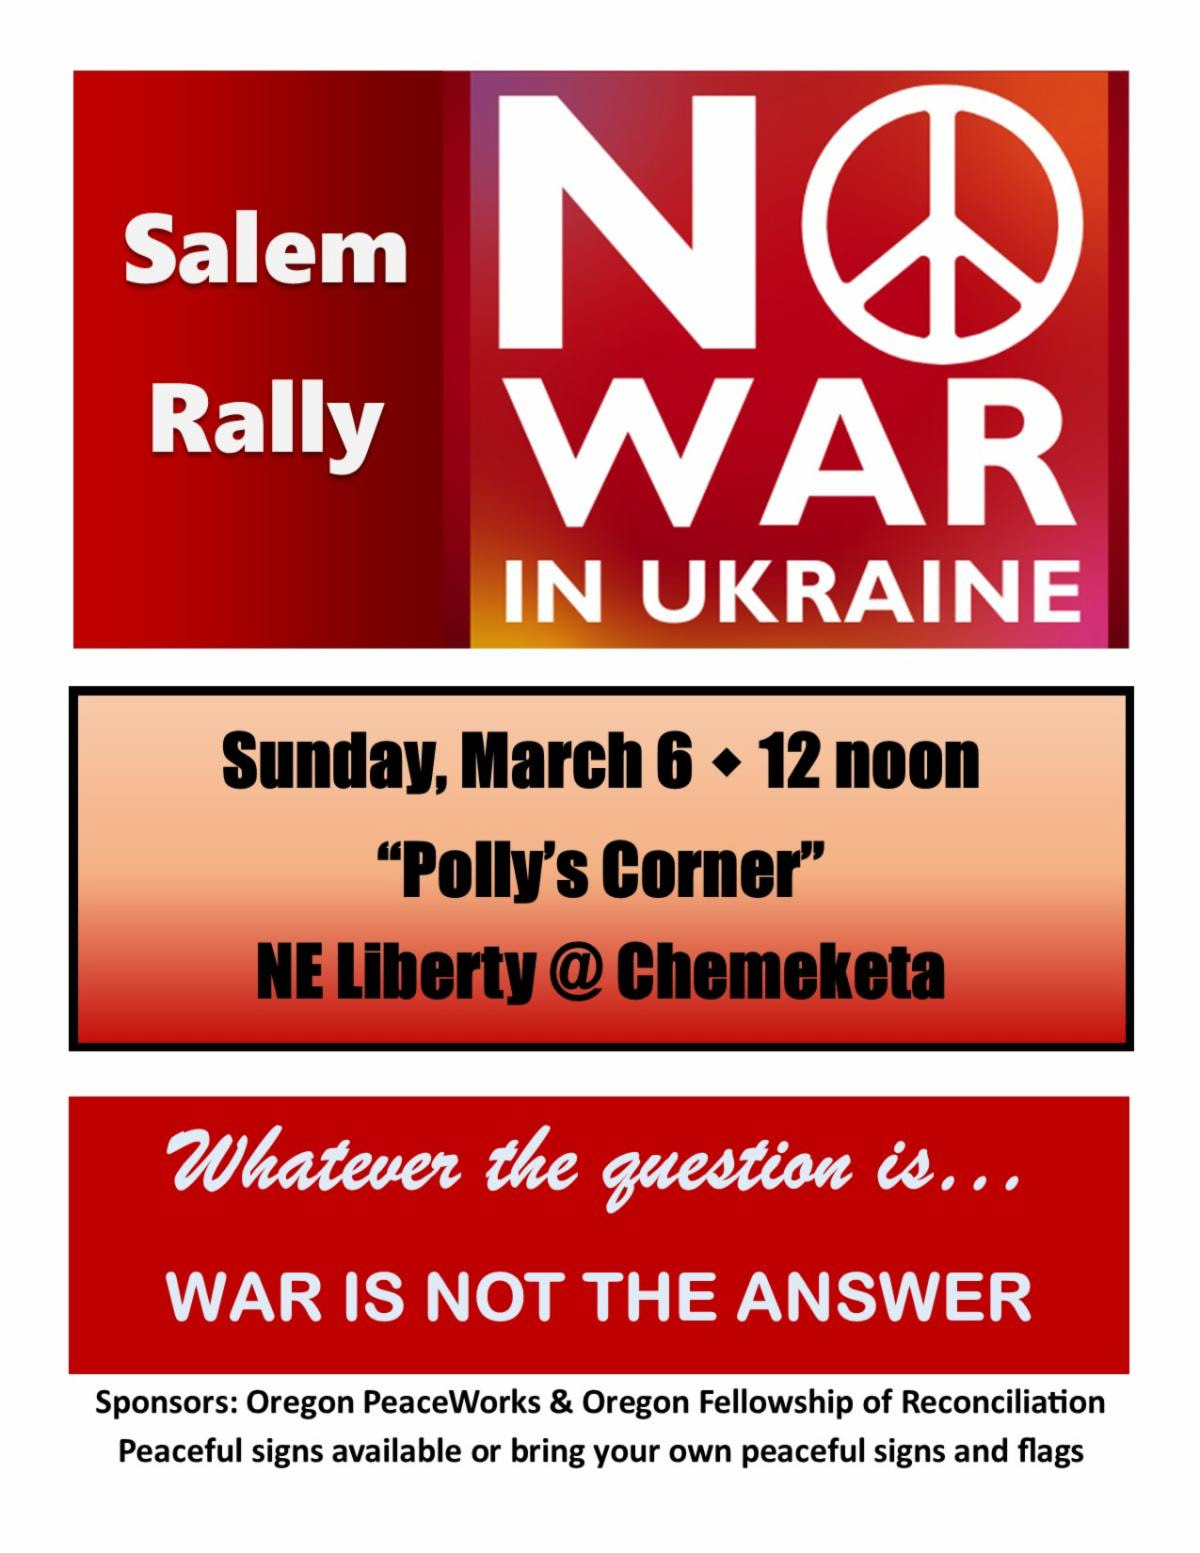 No War in Ukraine Salem rally graphic. Whatever the question is... War is not the answer